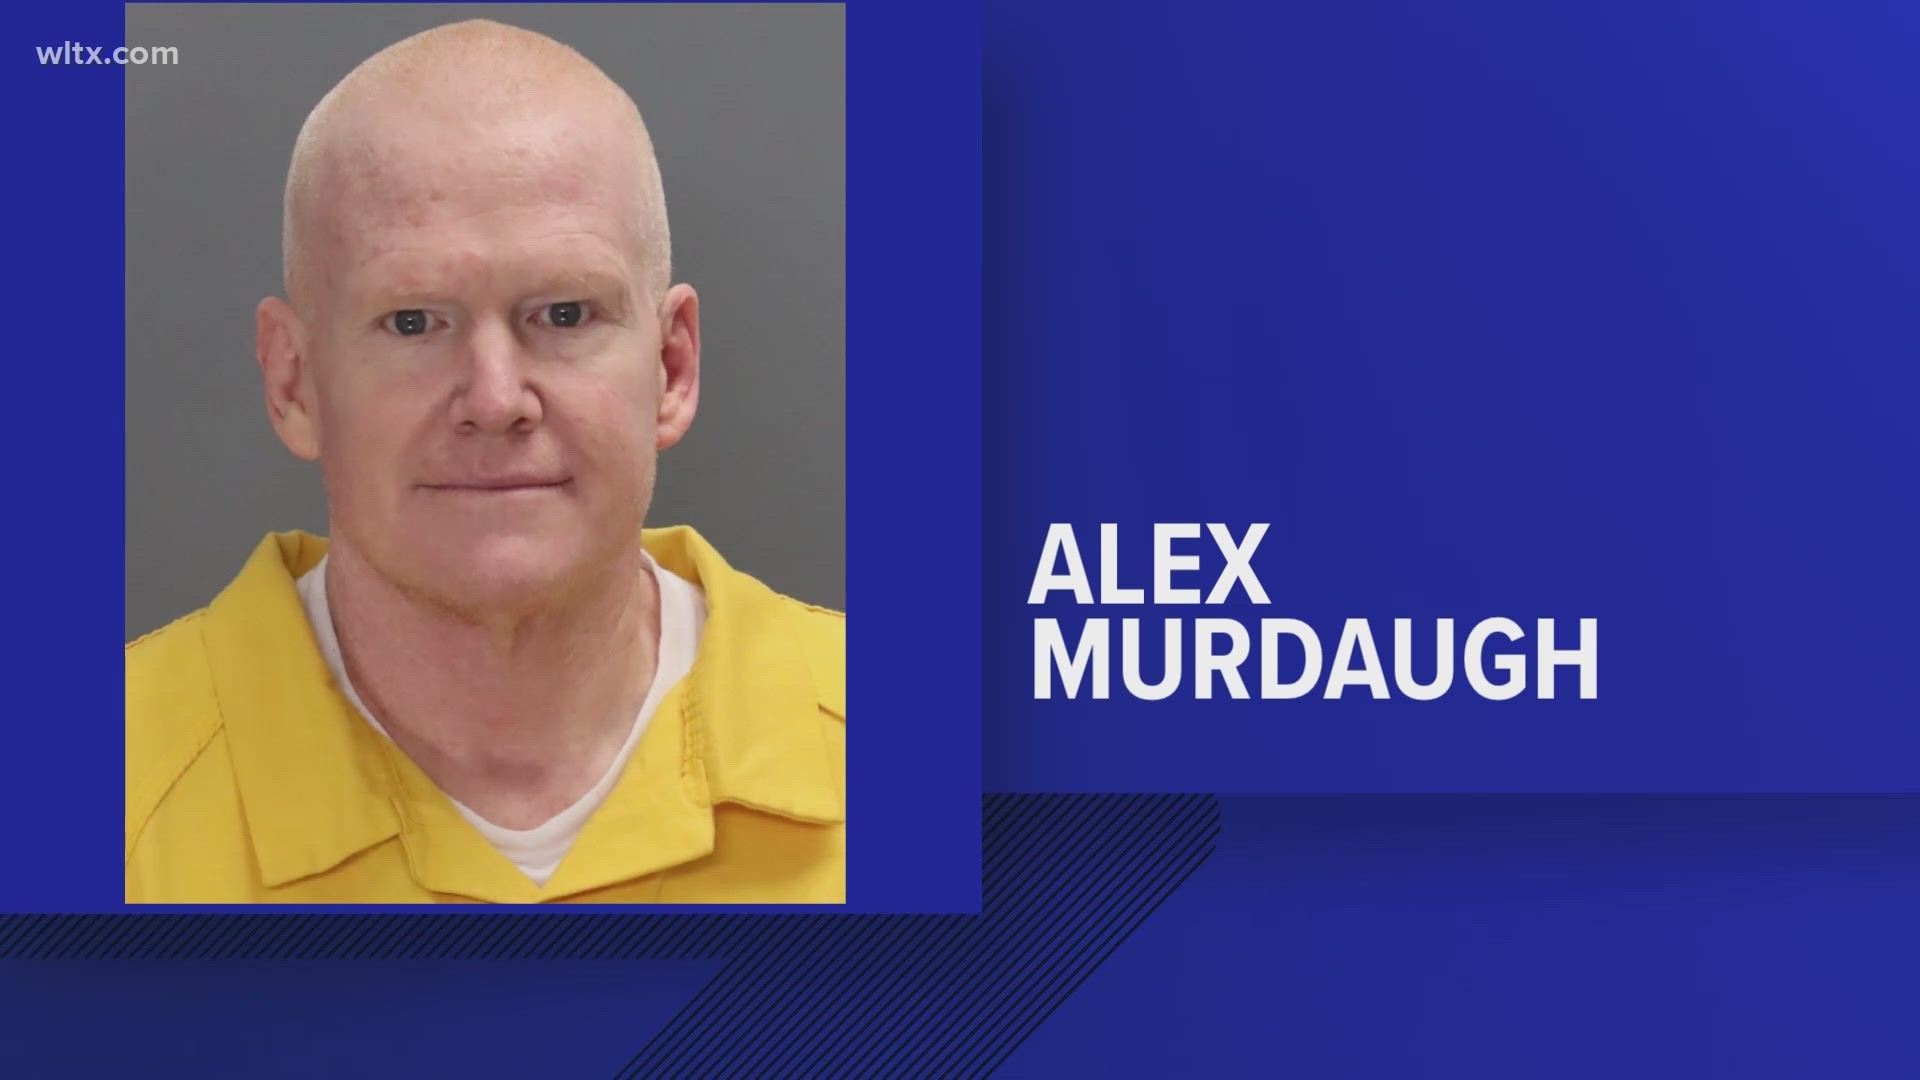 The attorneys for convicted double murderer Alex Murdaugh have filed a notice of appeal of his conviction in the high-profile case.